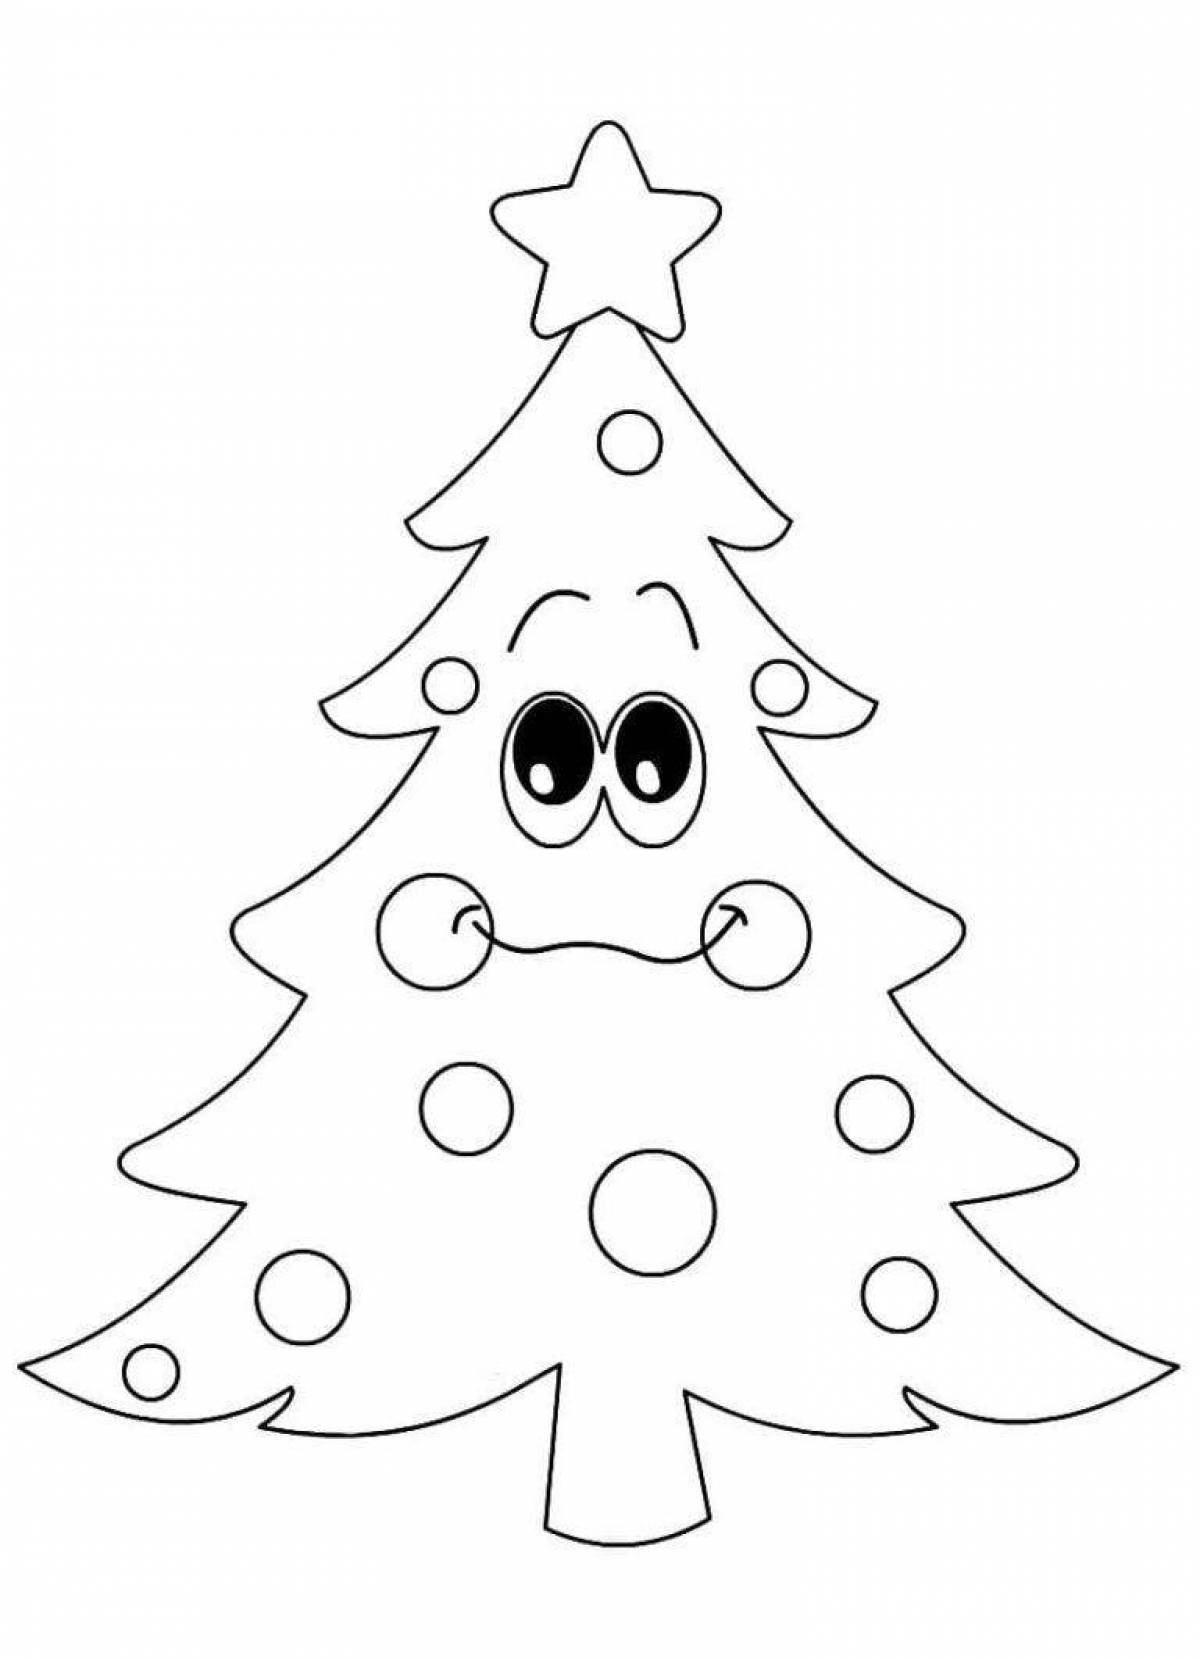 Exquisite Christmas tree coloring book for kids